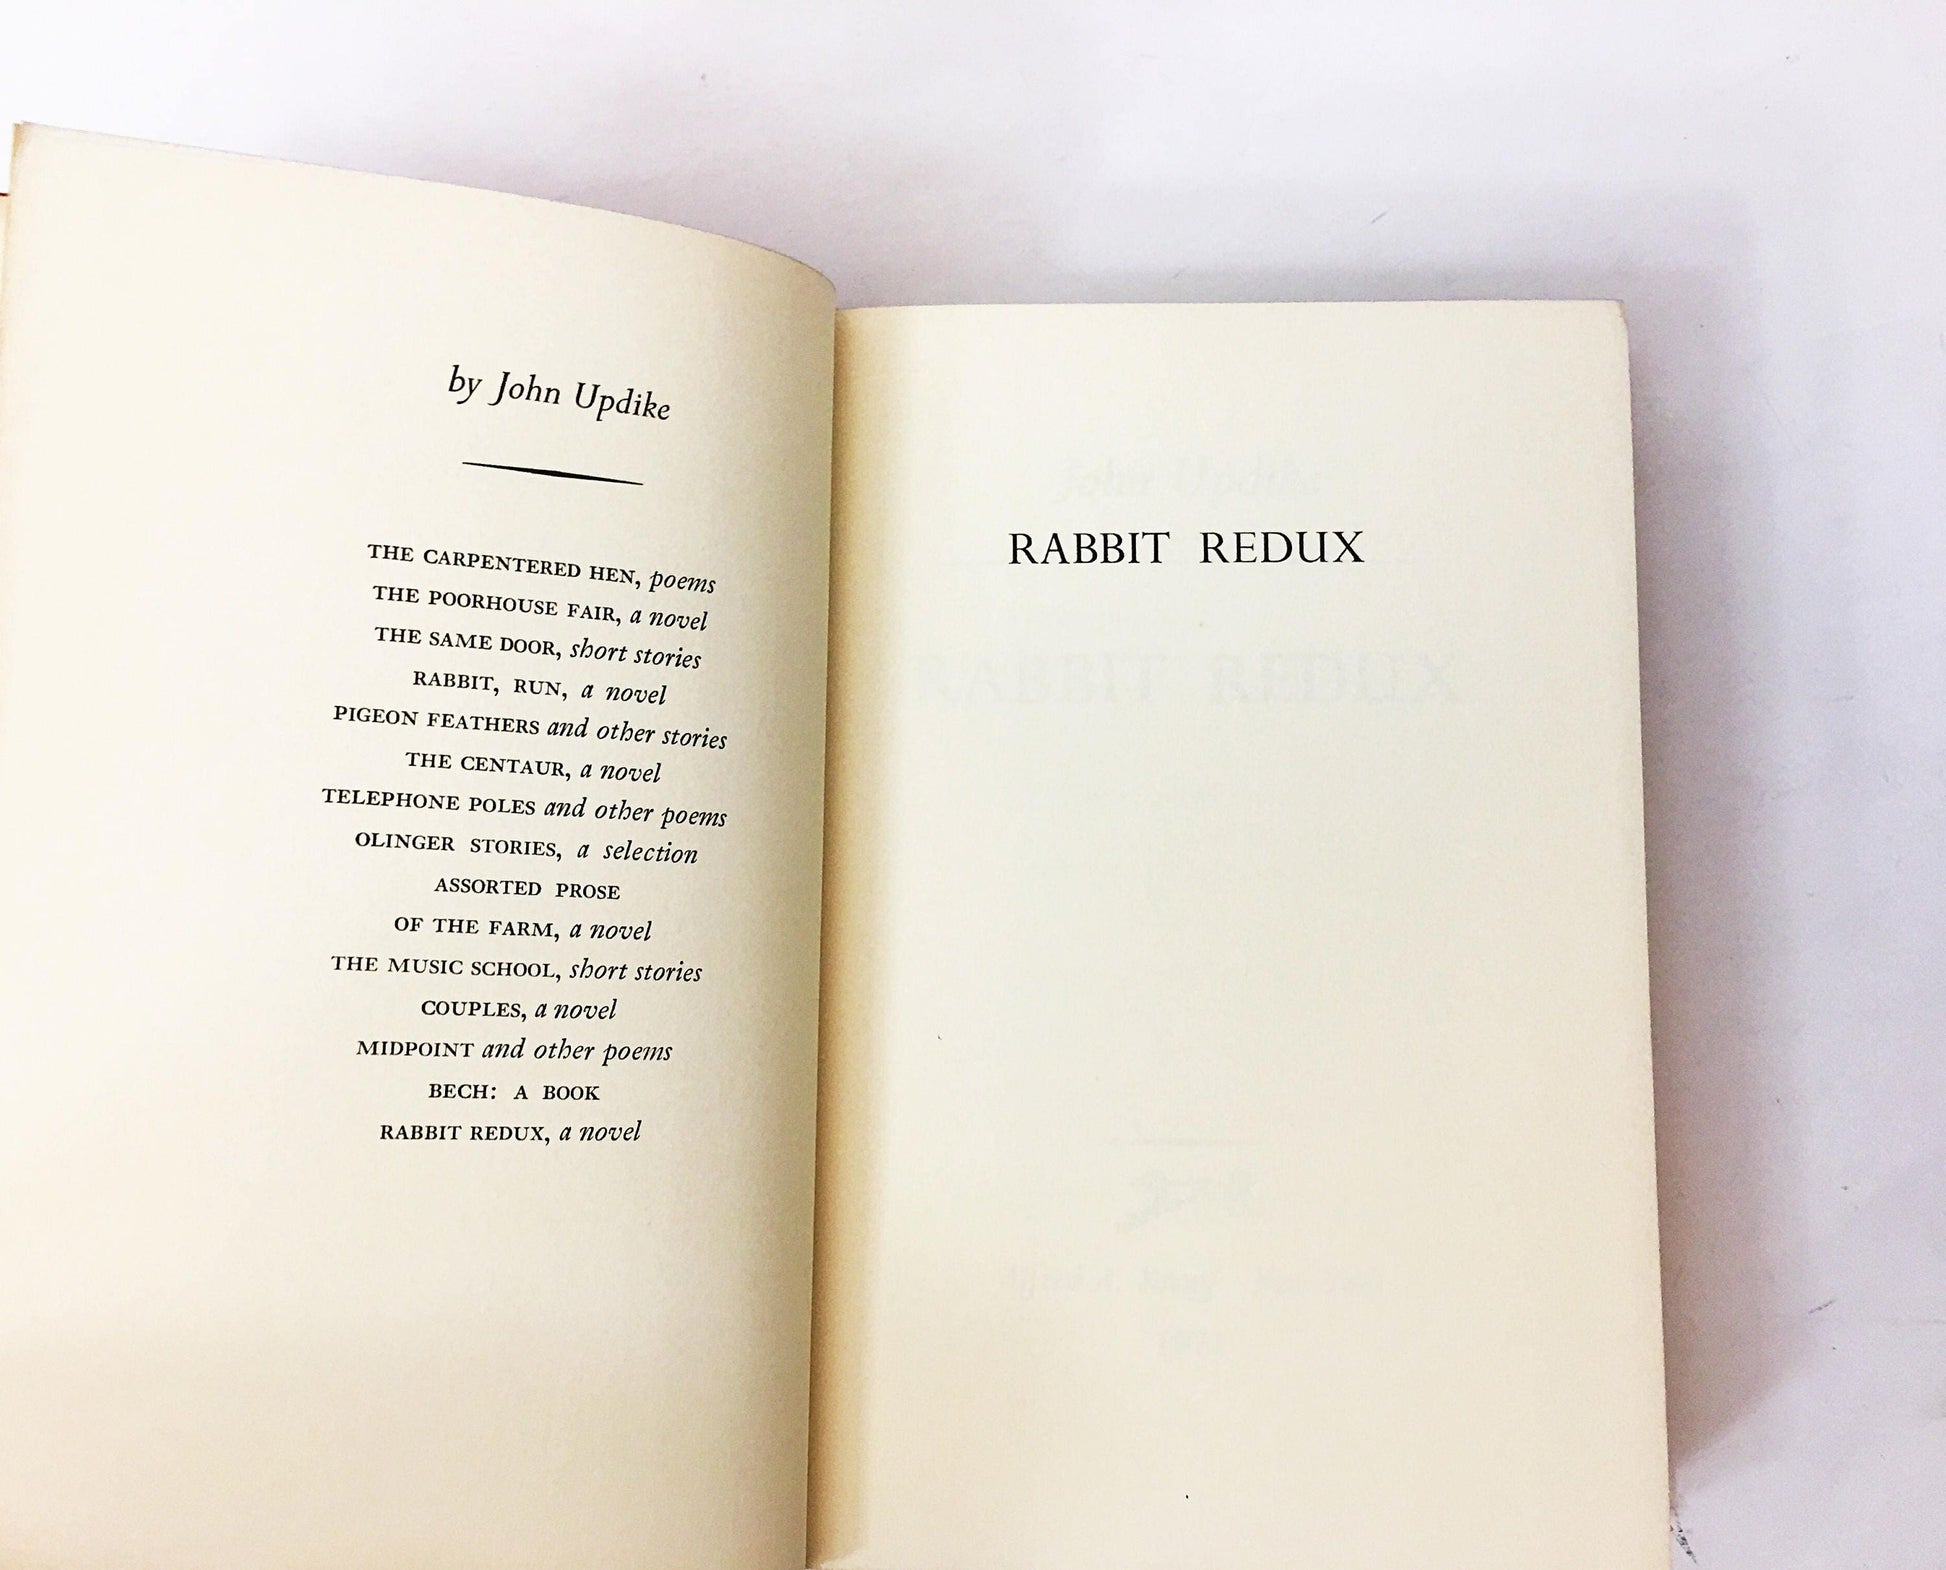 Rabbit Redux by John Updike. First Edition vintage book circa 1971. Spiritual quest of impulsive former athlete. Updike's Masterpiece. Gift